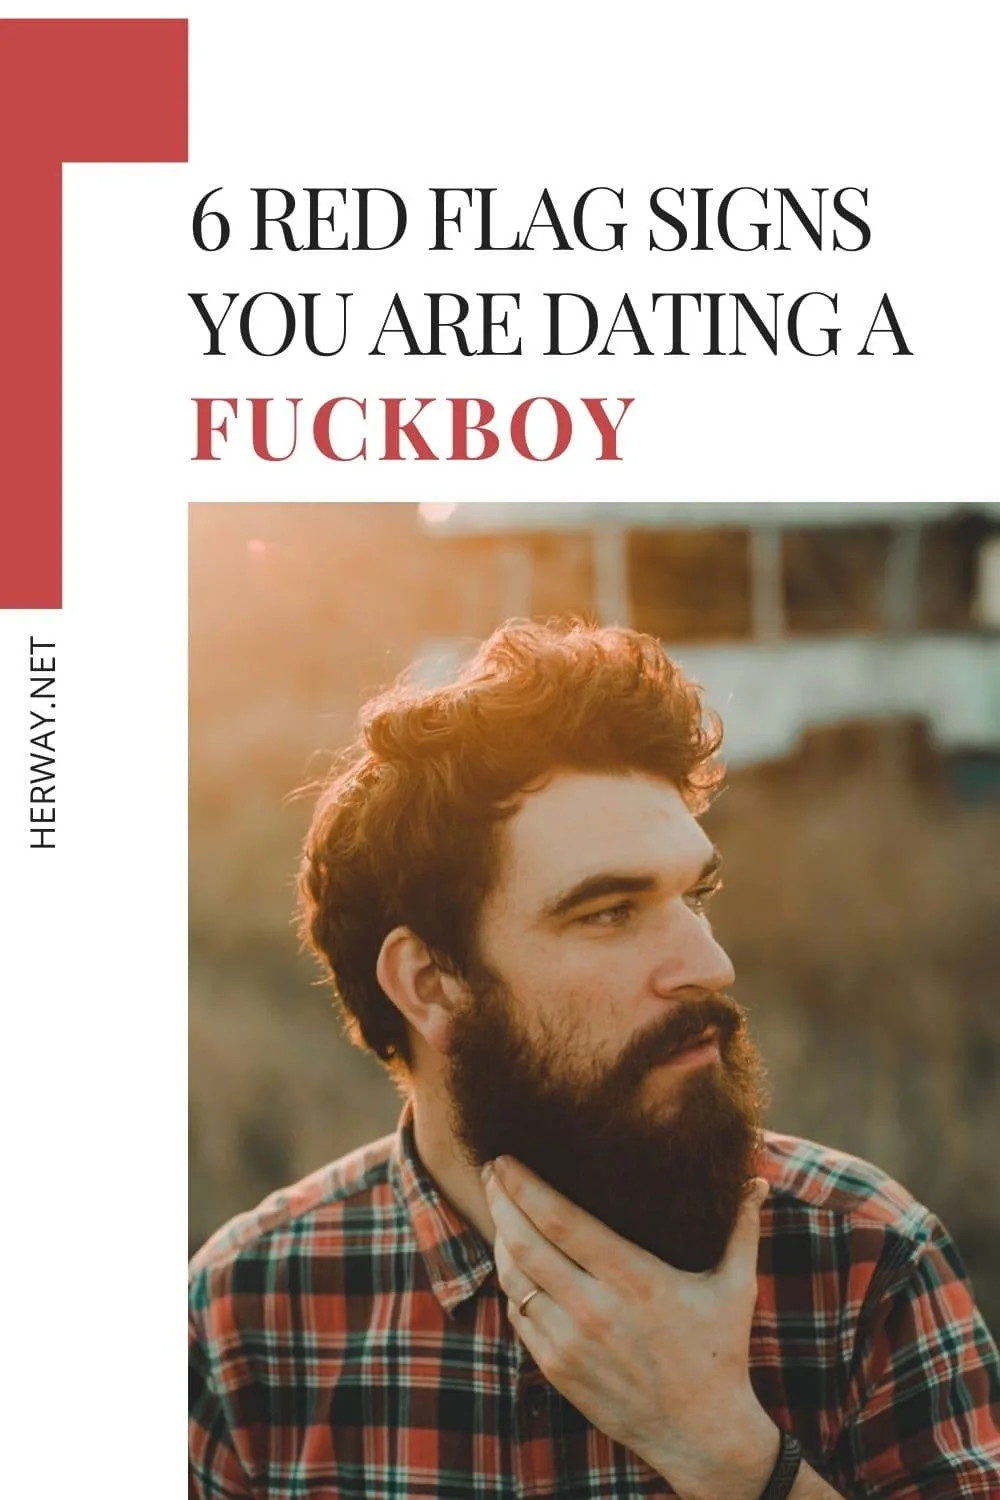 6 Red Flag Signs You Are Dating A Fuckboy